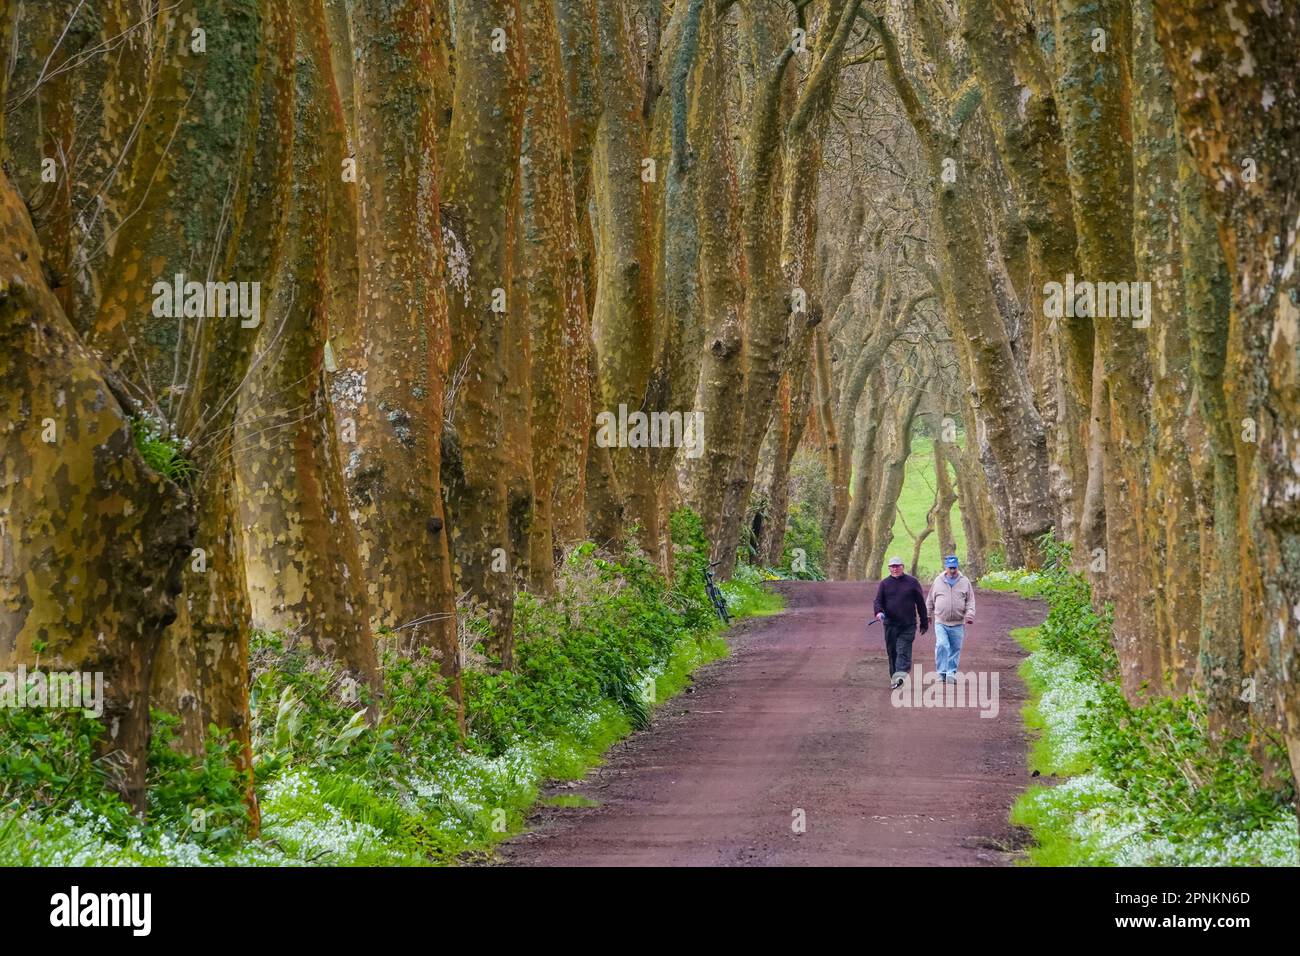 Azorean farmers walk down a dirt road between massive London Plane trees forming a tree tunnel on the Azores Island of Sao Miguel near Povoacao, Portugal. Stock Photo